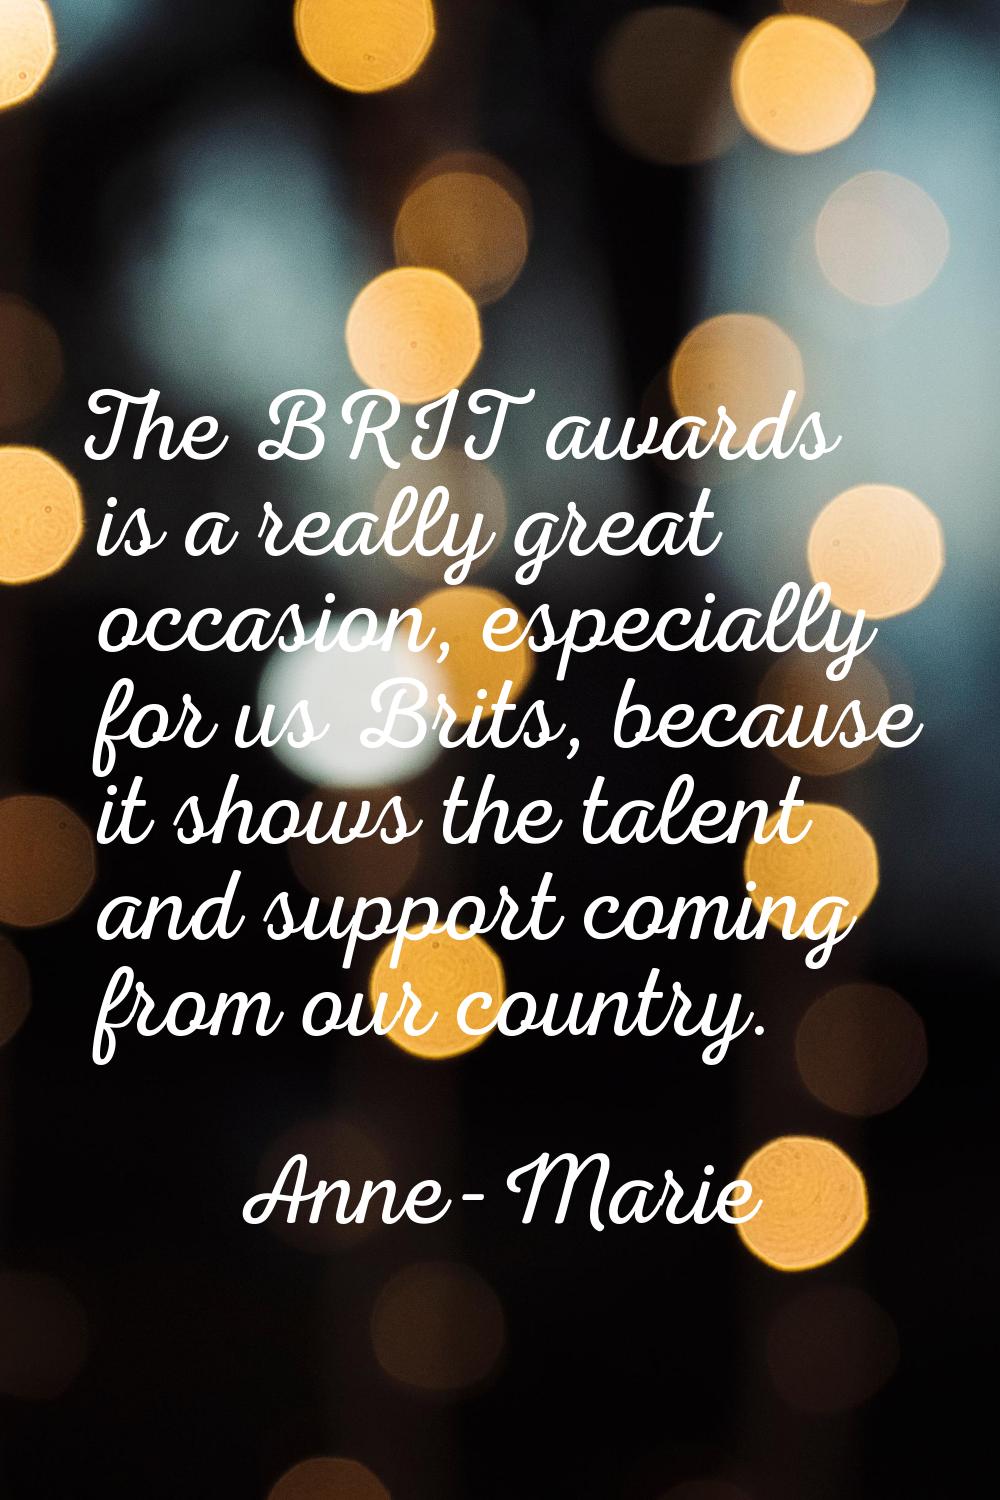 The BRIT awards is a really great occasion, especially for us Brits, because it shows the talent an